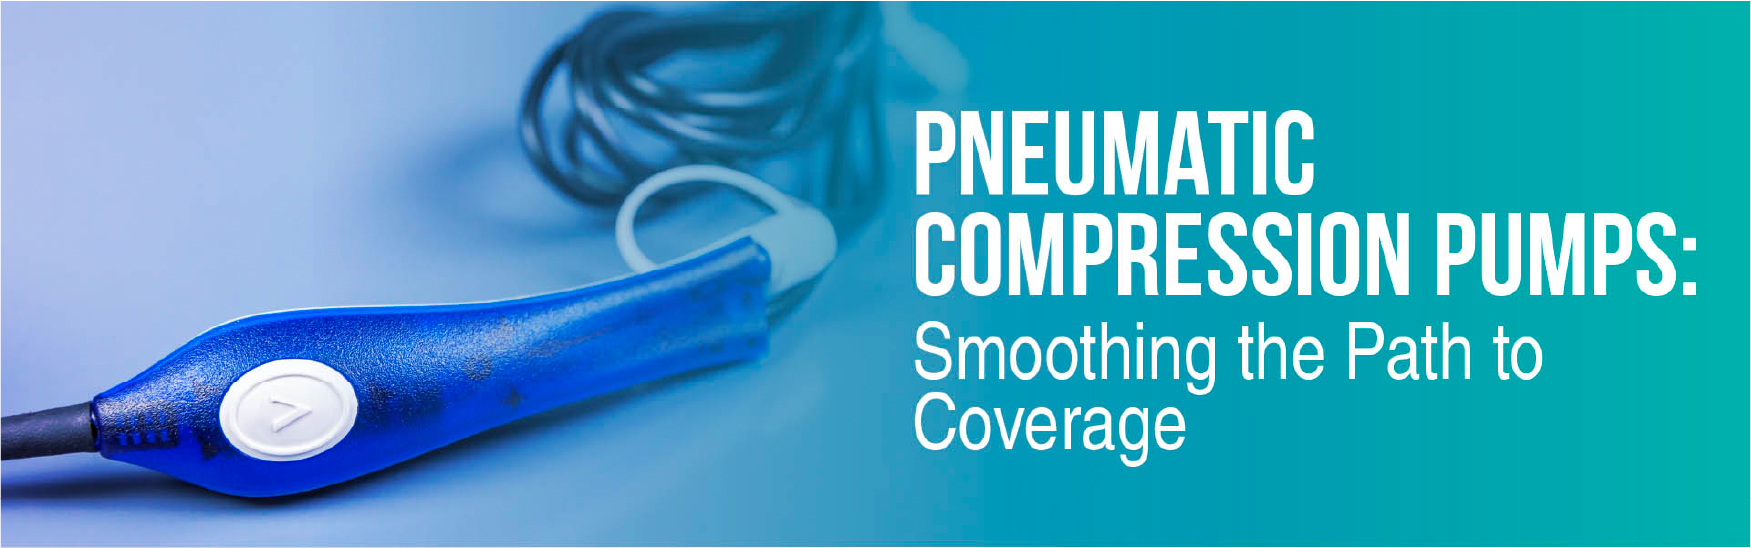 Pneumatic Compression Pumps: Smoothing The Path To Coverage - Vein 360